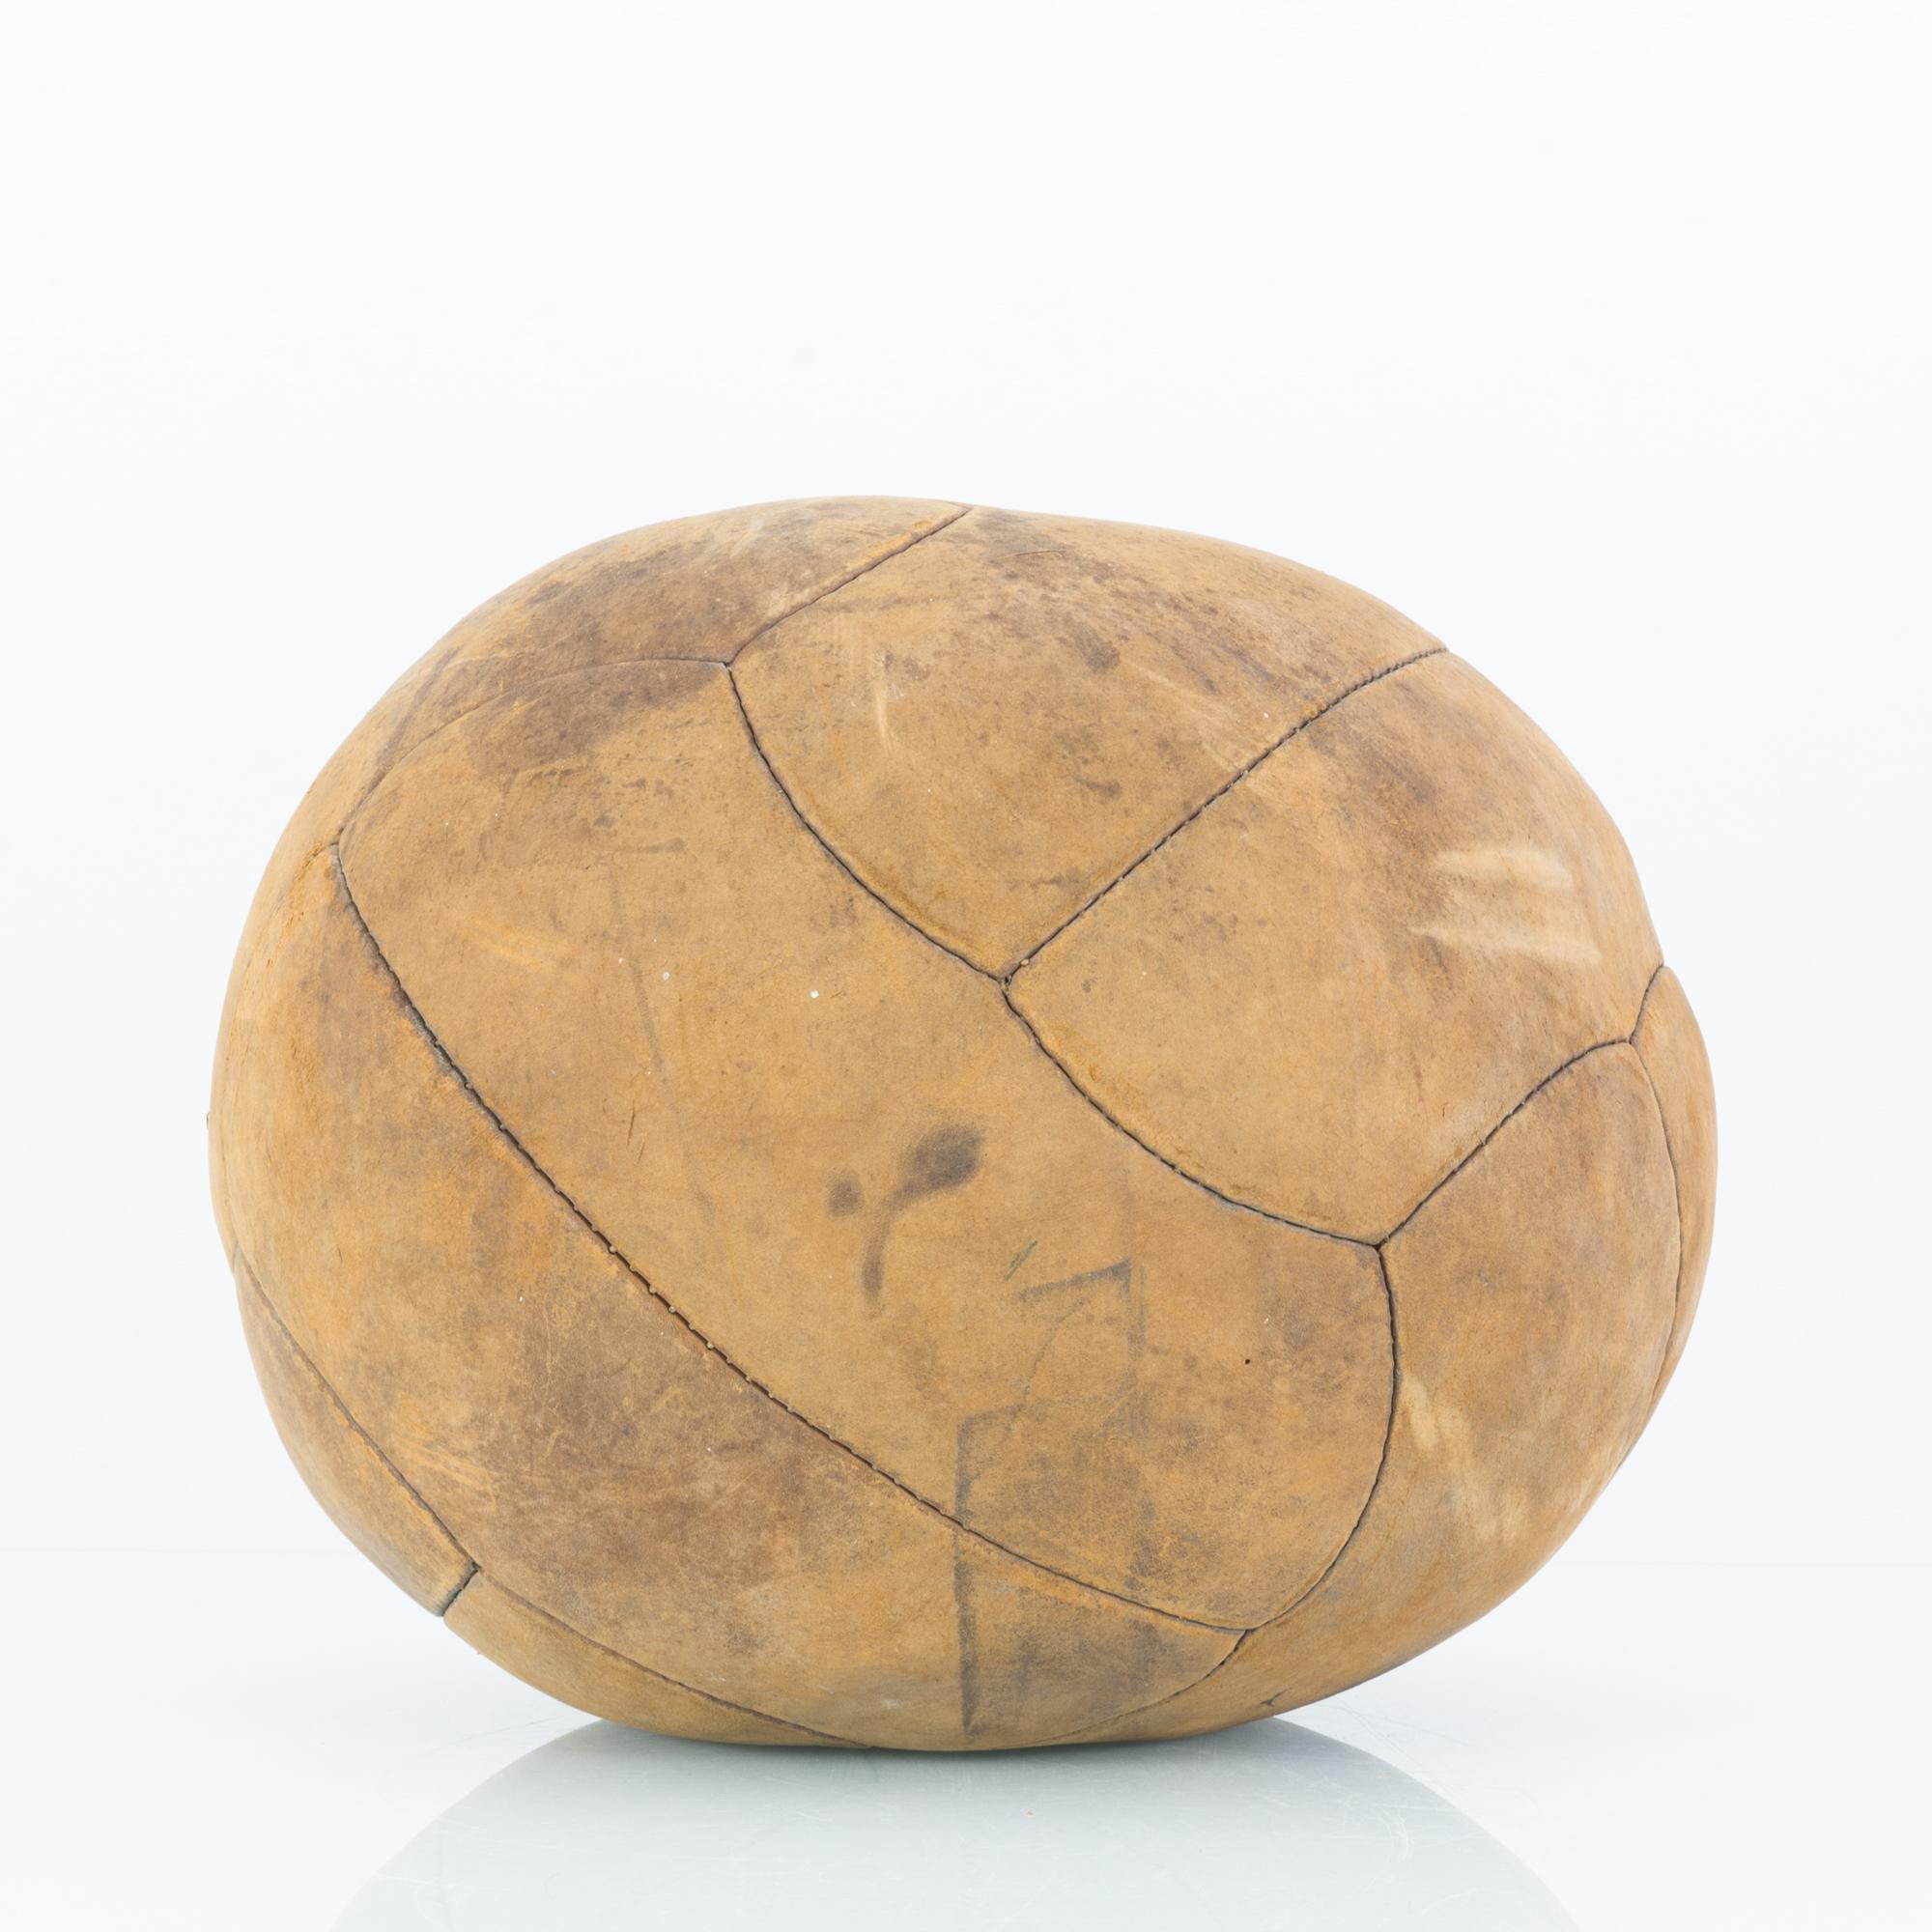 This medicine ball was made in Central Europe. Handcrafted from leather panels, this medicine ball sports a timeworn patina with a camel tone, seasoned from the past rigors of a fitness regime.